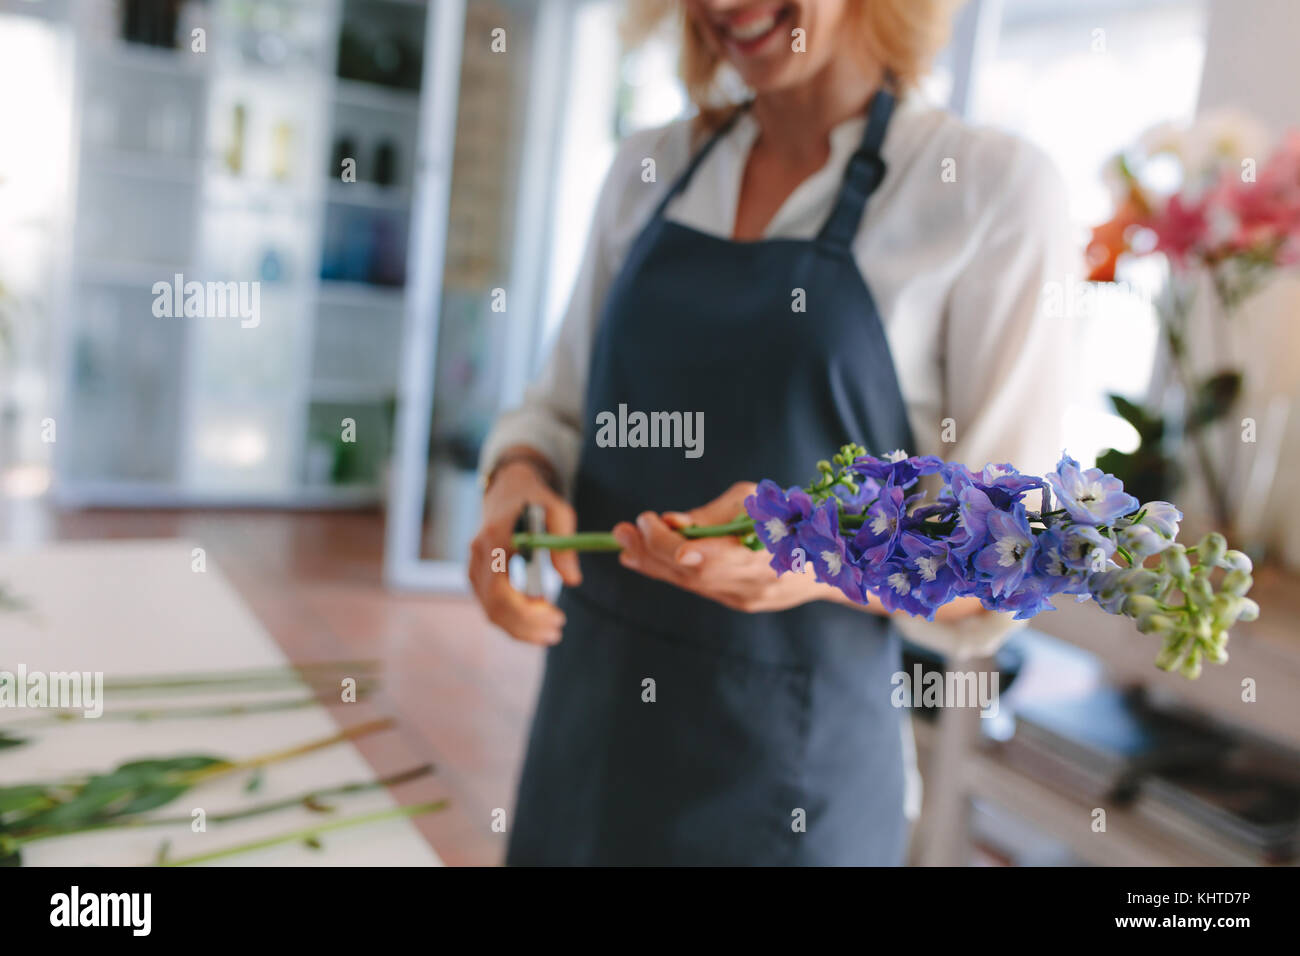 Female florist creating bouquet of flowers. Woman florist cutting flowers with scissors and designing bouquet at workshop. Focus on flowers. Stock Photo